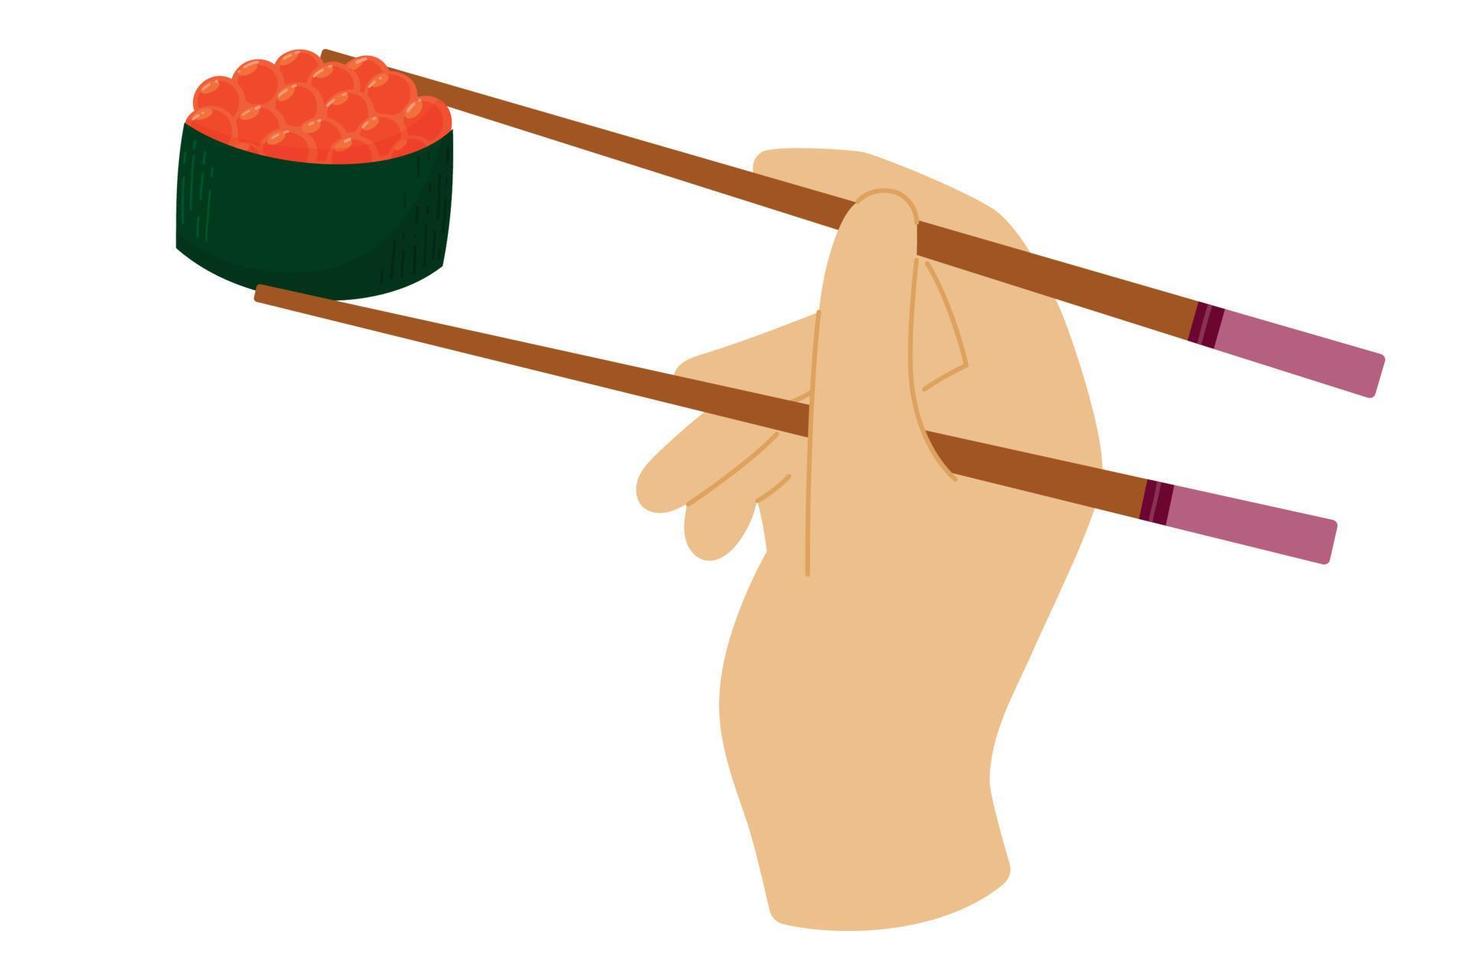 Cartoon hand holds chopsticks with red caviar gunkan sushi. Japanese cuisine, traditional food isolated on white background vector